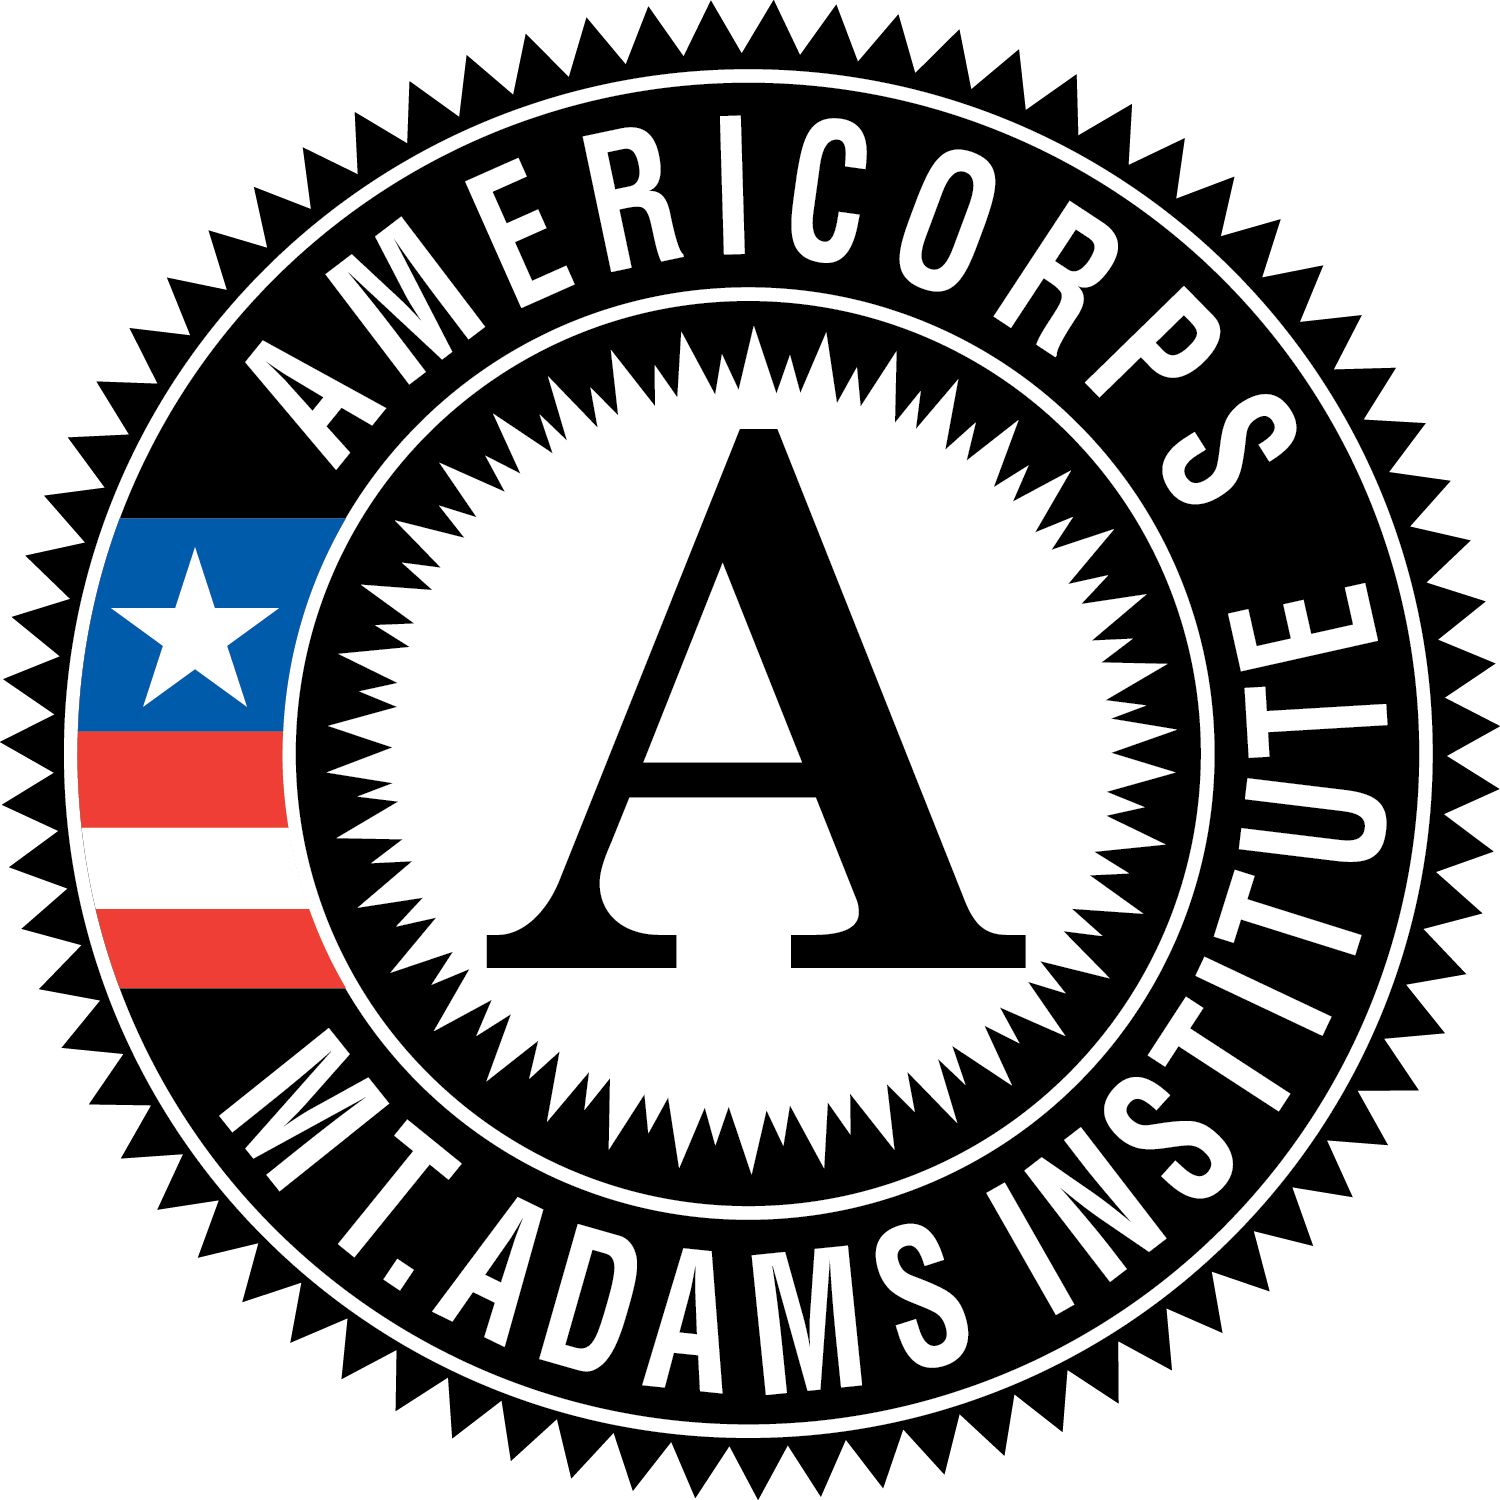 Mt. Adams Institute Receives AmeriCorps Grant to Expand Programs